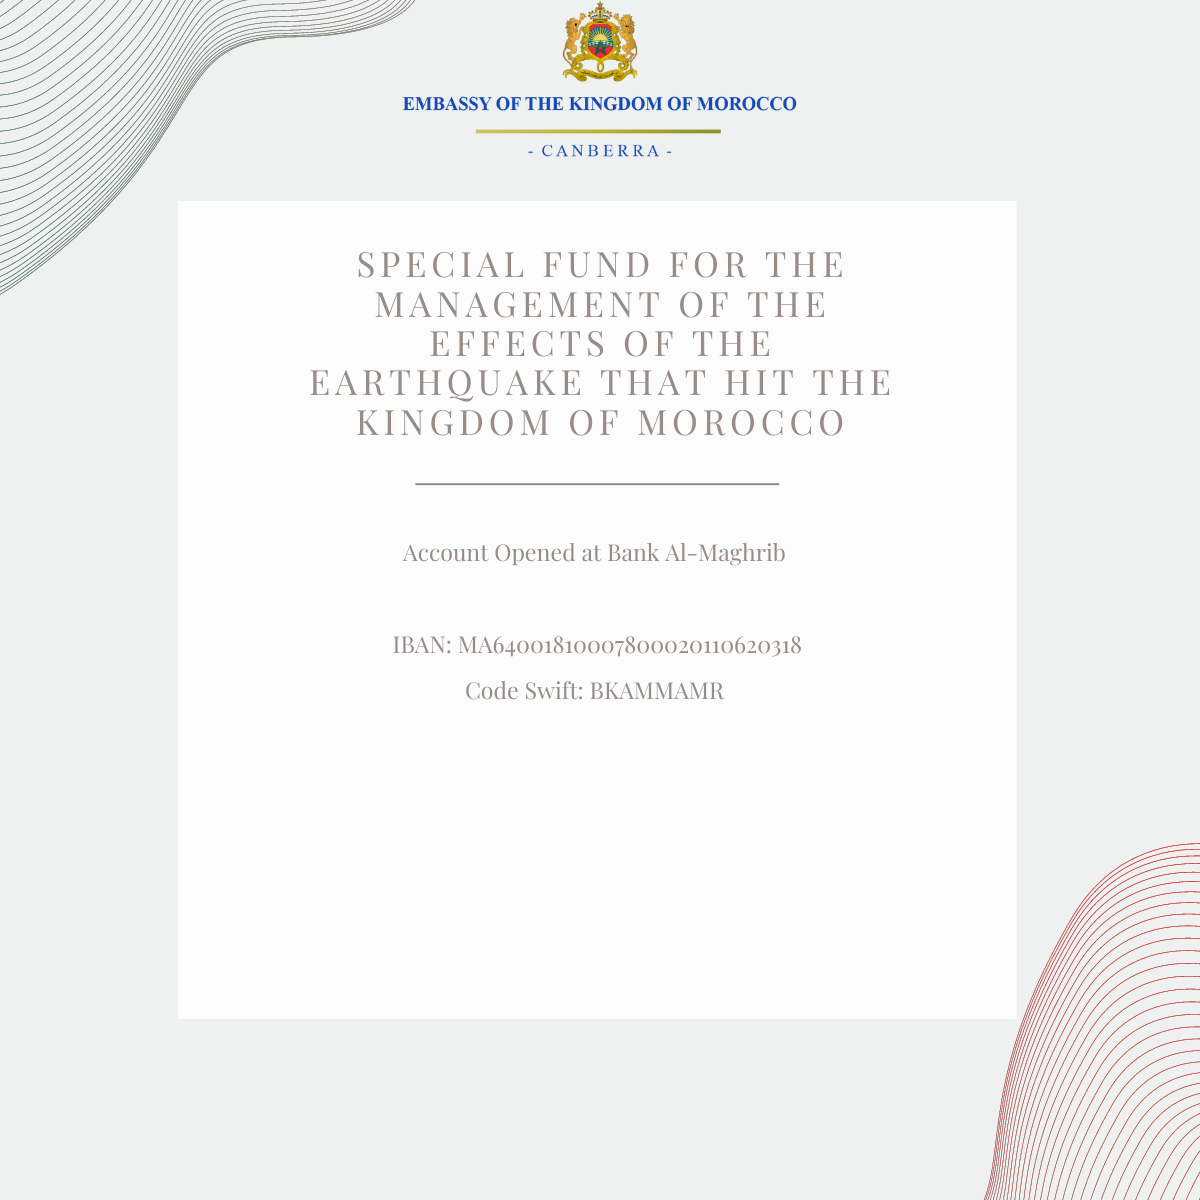 Special Fund for the Management of the Effects of the Earthquake that Hit the Kingdom of Morocco